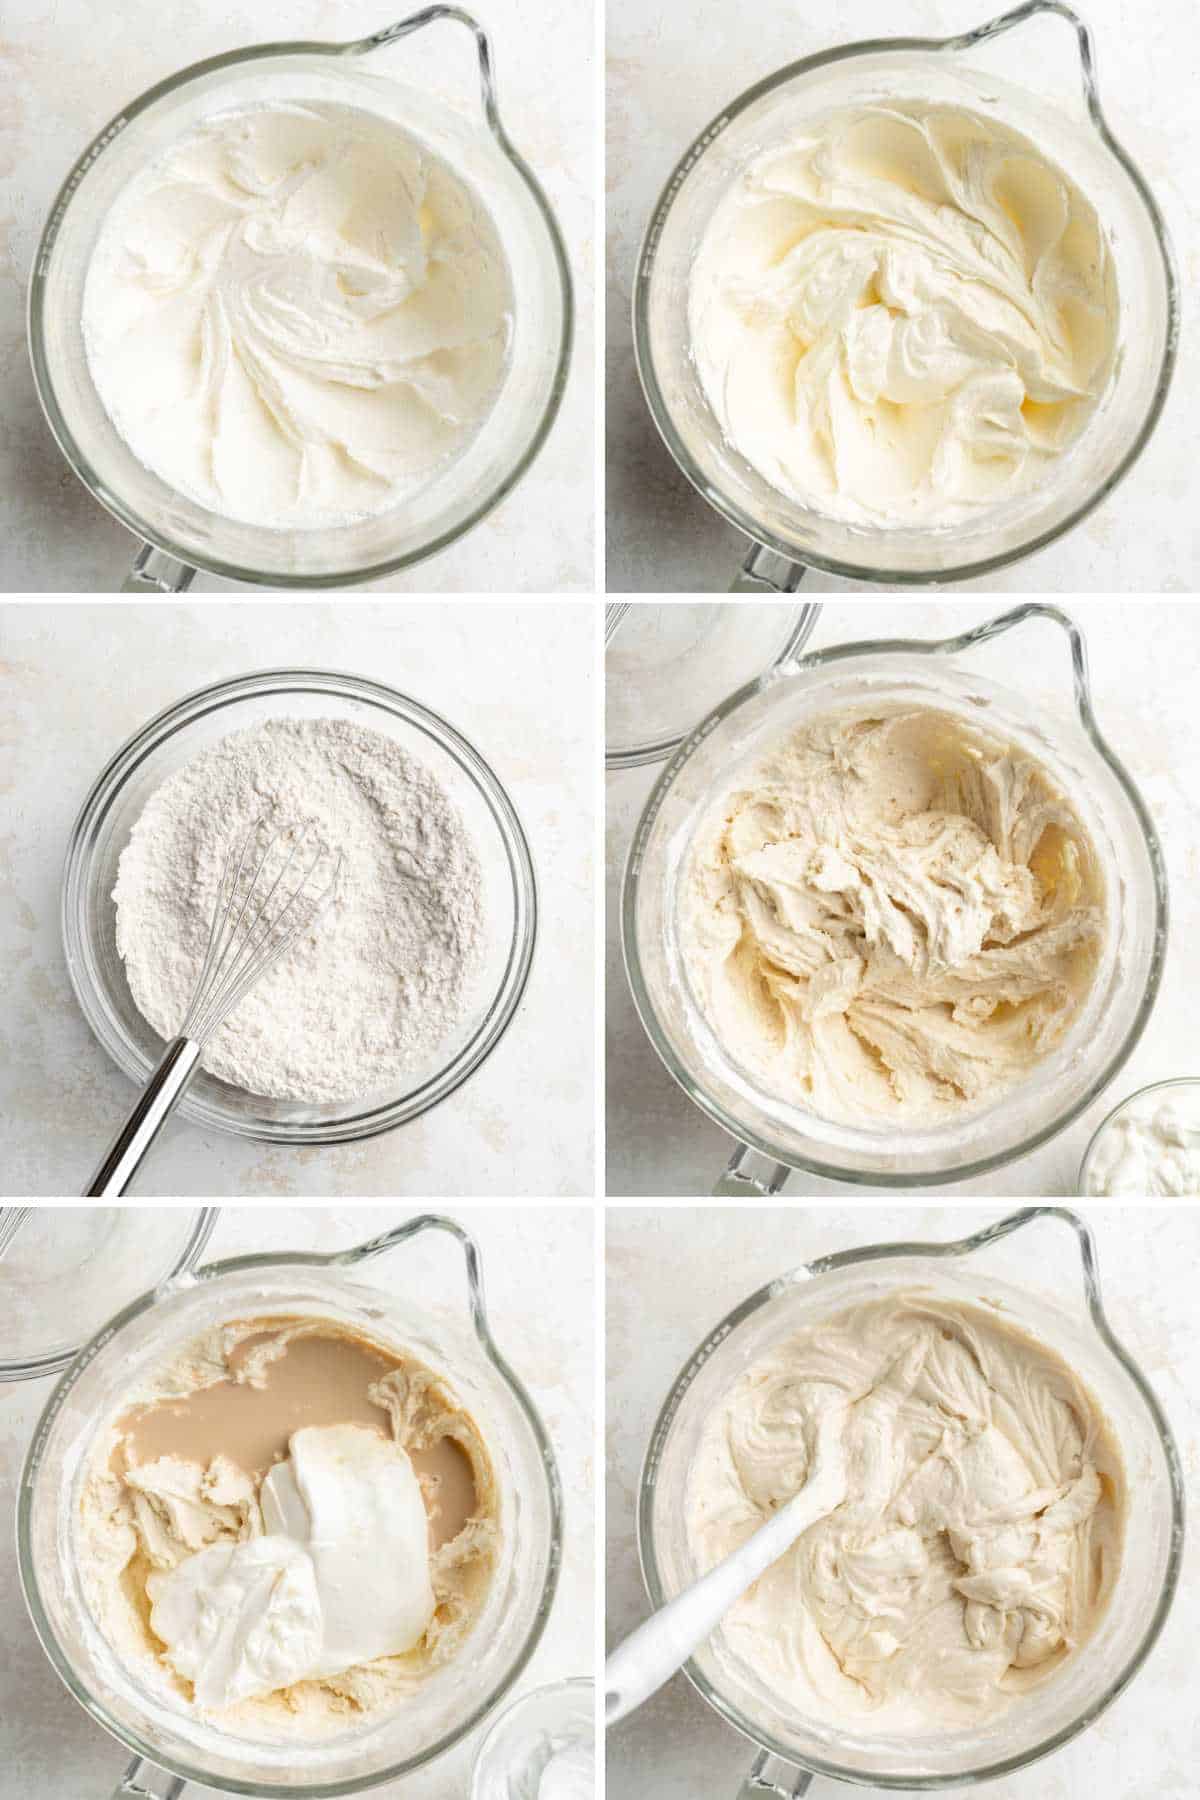 Collage of images showing making the pineapple upside down cupcake batter.